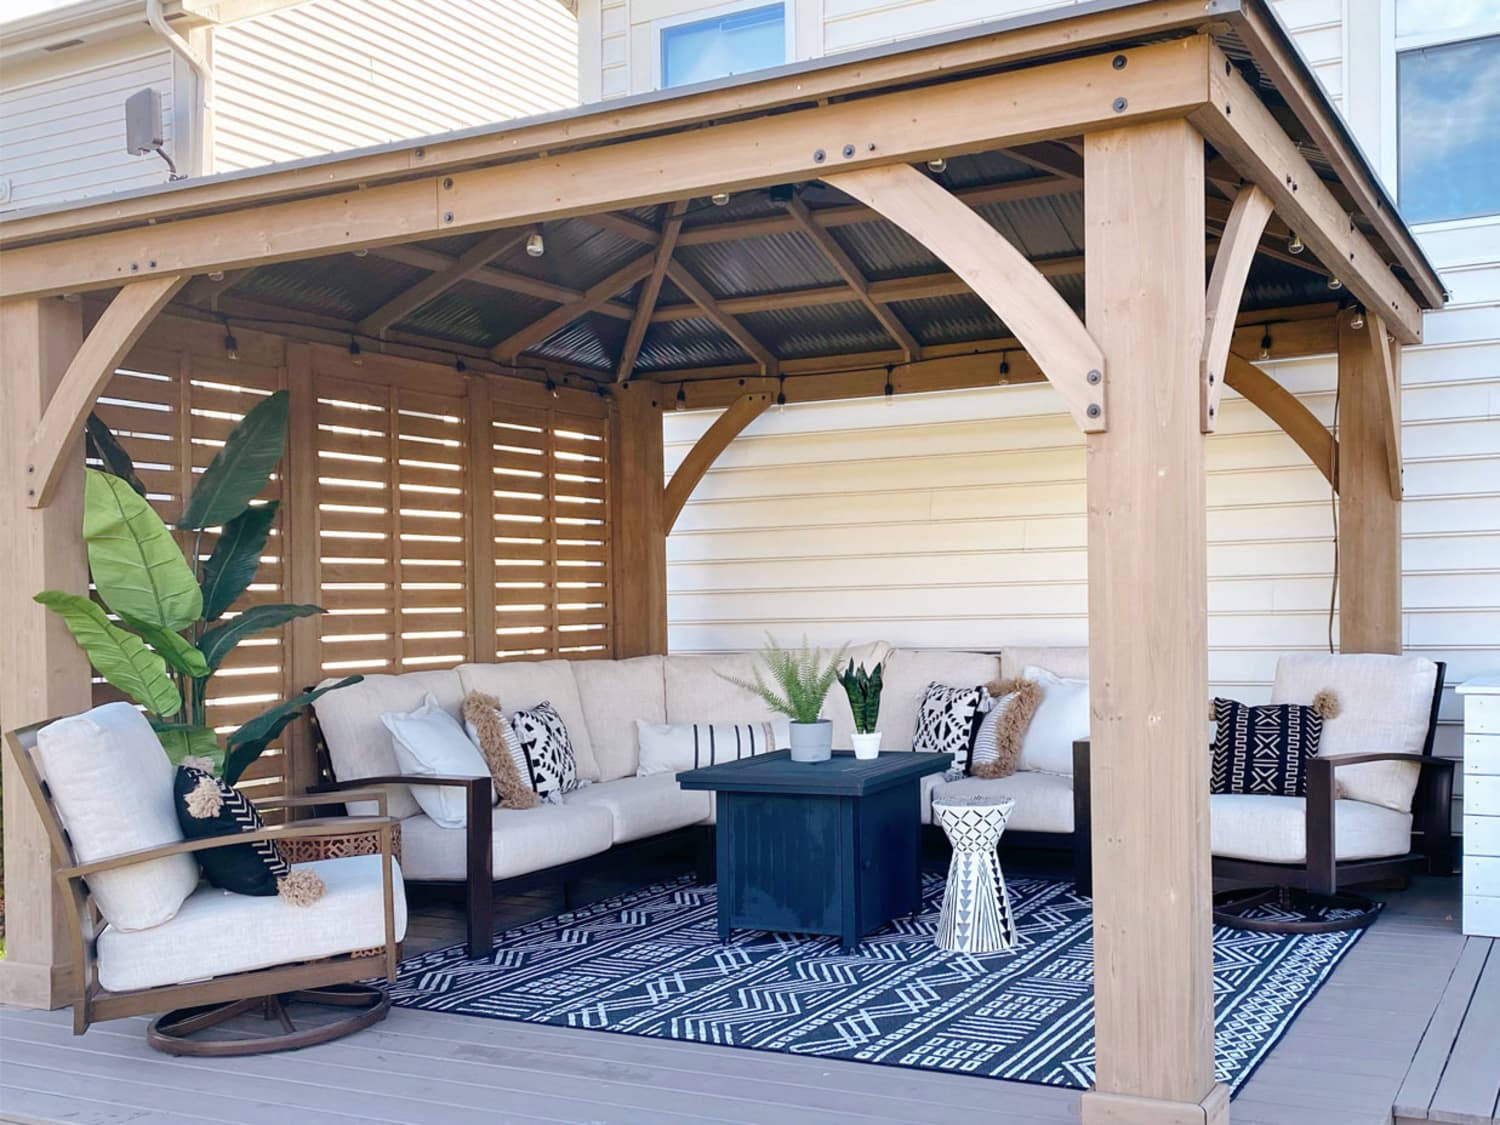 Transform Your Deck Into an Oasis: Top 5 Outdoor Rugs for Decks